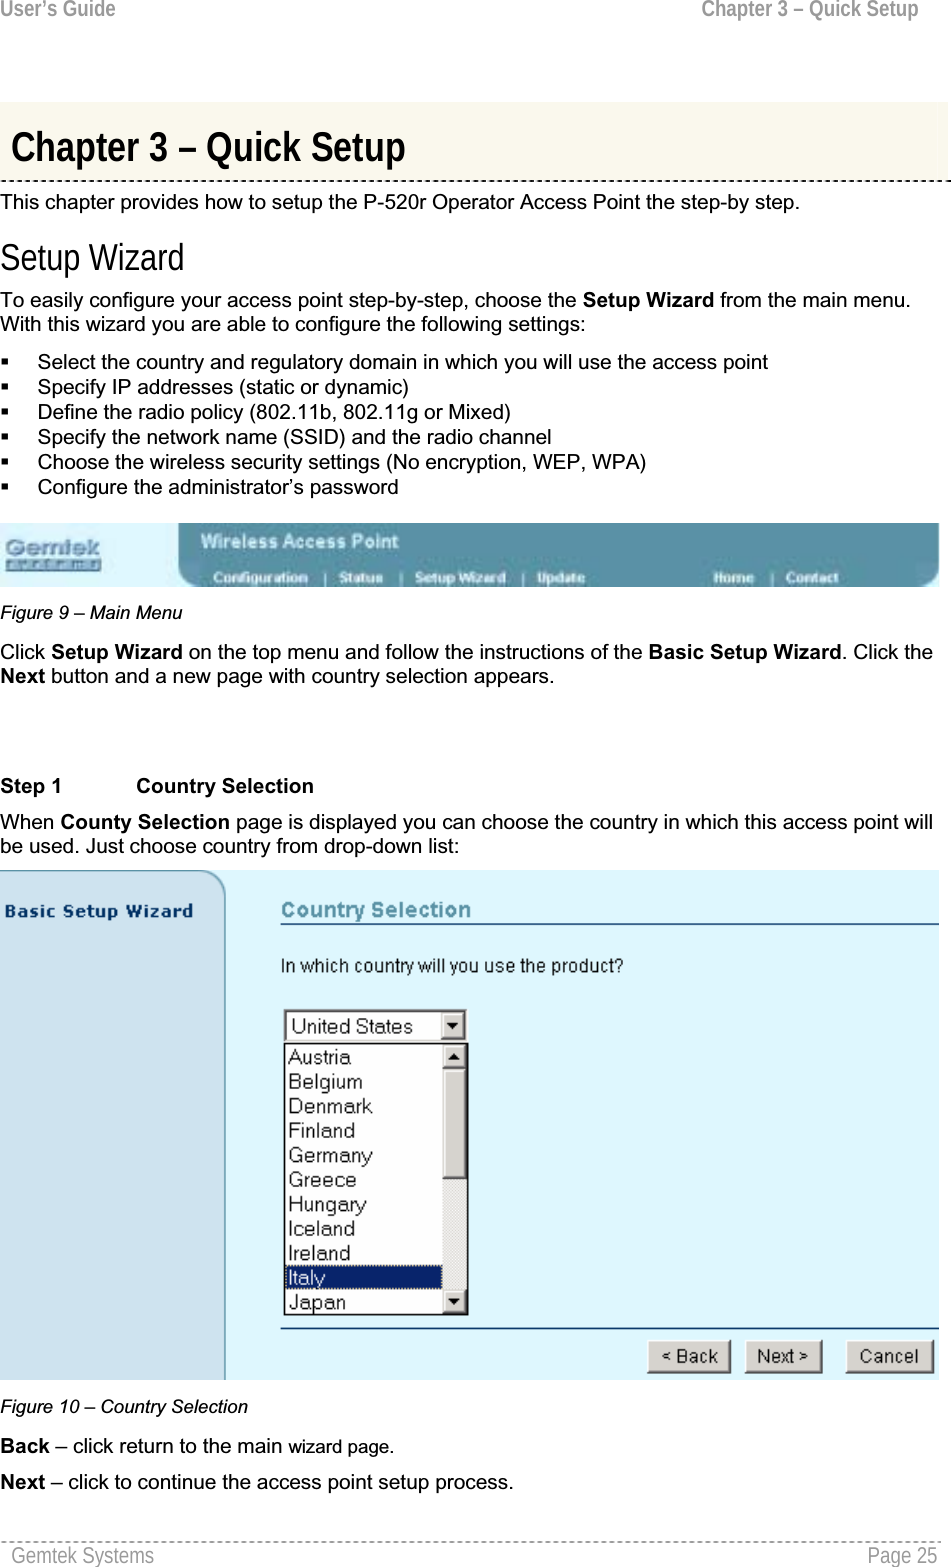 User’s Guide  Chapter 3 – Quick SetupChapter 3 – Quick Setup This chapter provides how to setup the P-520r Operator Access Point the step-by step. Setup Wizard To easily configure your access point step-by-step, choose the Setup Wizard from the main menu.With this wizard you are able to configure the following settings:Select the country and regulatory domain in which you will use the access pointSpecify IP addresses (static or dynamic)Define the radio policy (802.11b, 802.11g or Mixed) Specify the network name (SSID) and the radio channelChoose the wireless security settings (No encryption, WEP, WPA) Configure the administrator’s passwordFigure 9 – Main Menu Click Setup Wizard on the top menu and follow the instructions of the Basic Setup Wizard. Click theNext button and a new page with country selection appears.Step 1 Country Selection When County Selection page is displayed you can choose the country in which this access point will be used. Just choose country from drop-down list: Figure 10 – Country SelectionBack – click return to the main wizard page.Next – click to continue the access point setup process.Gemtek Systems  Page 25